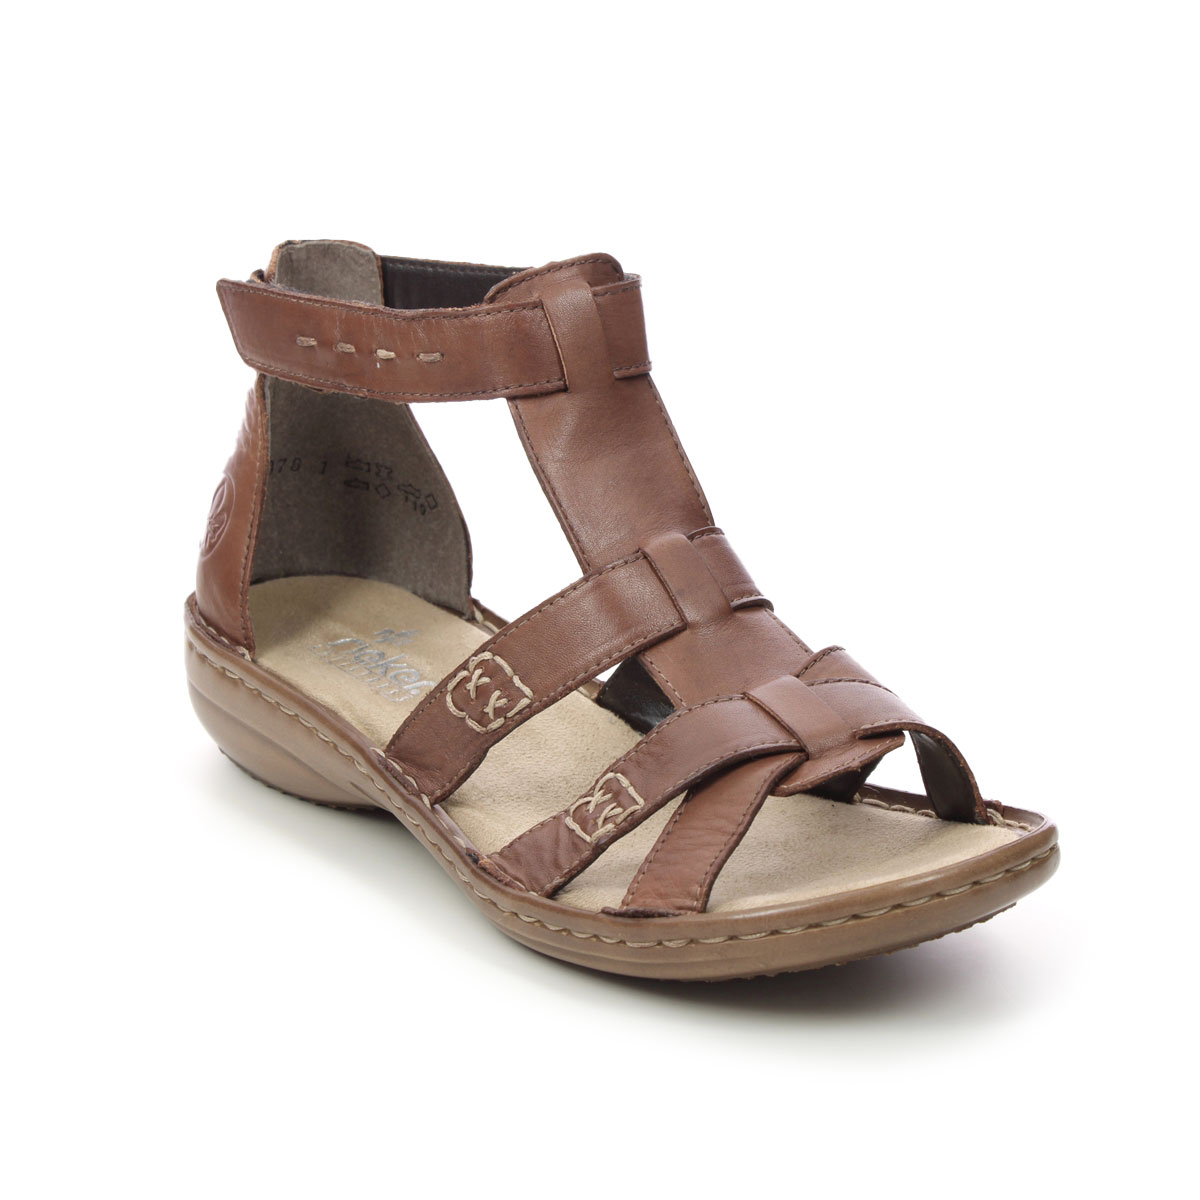 Rieker 60860-24 Tan Leather Womens Gladiator Sandals in a Plain Leather in Size 36